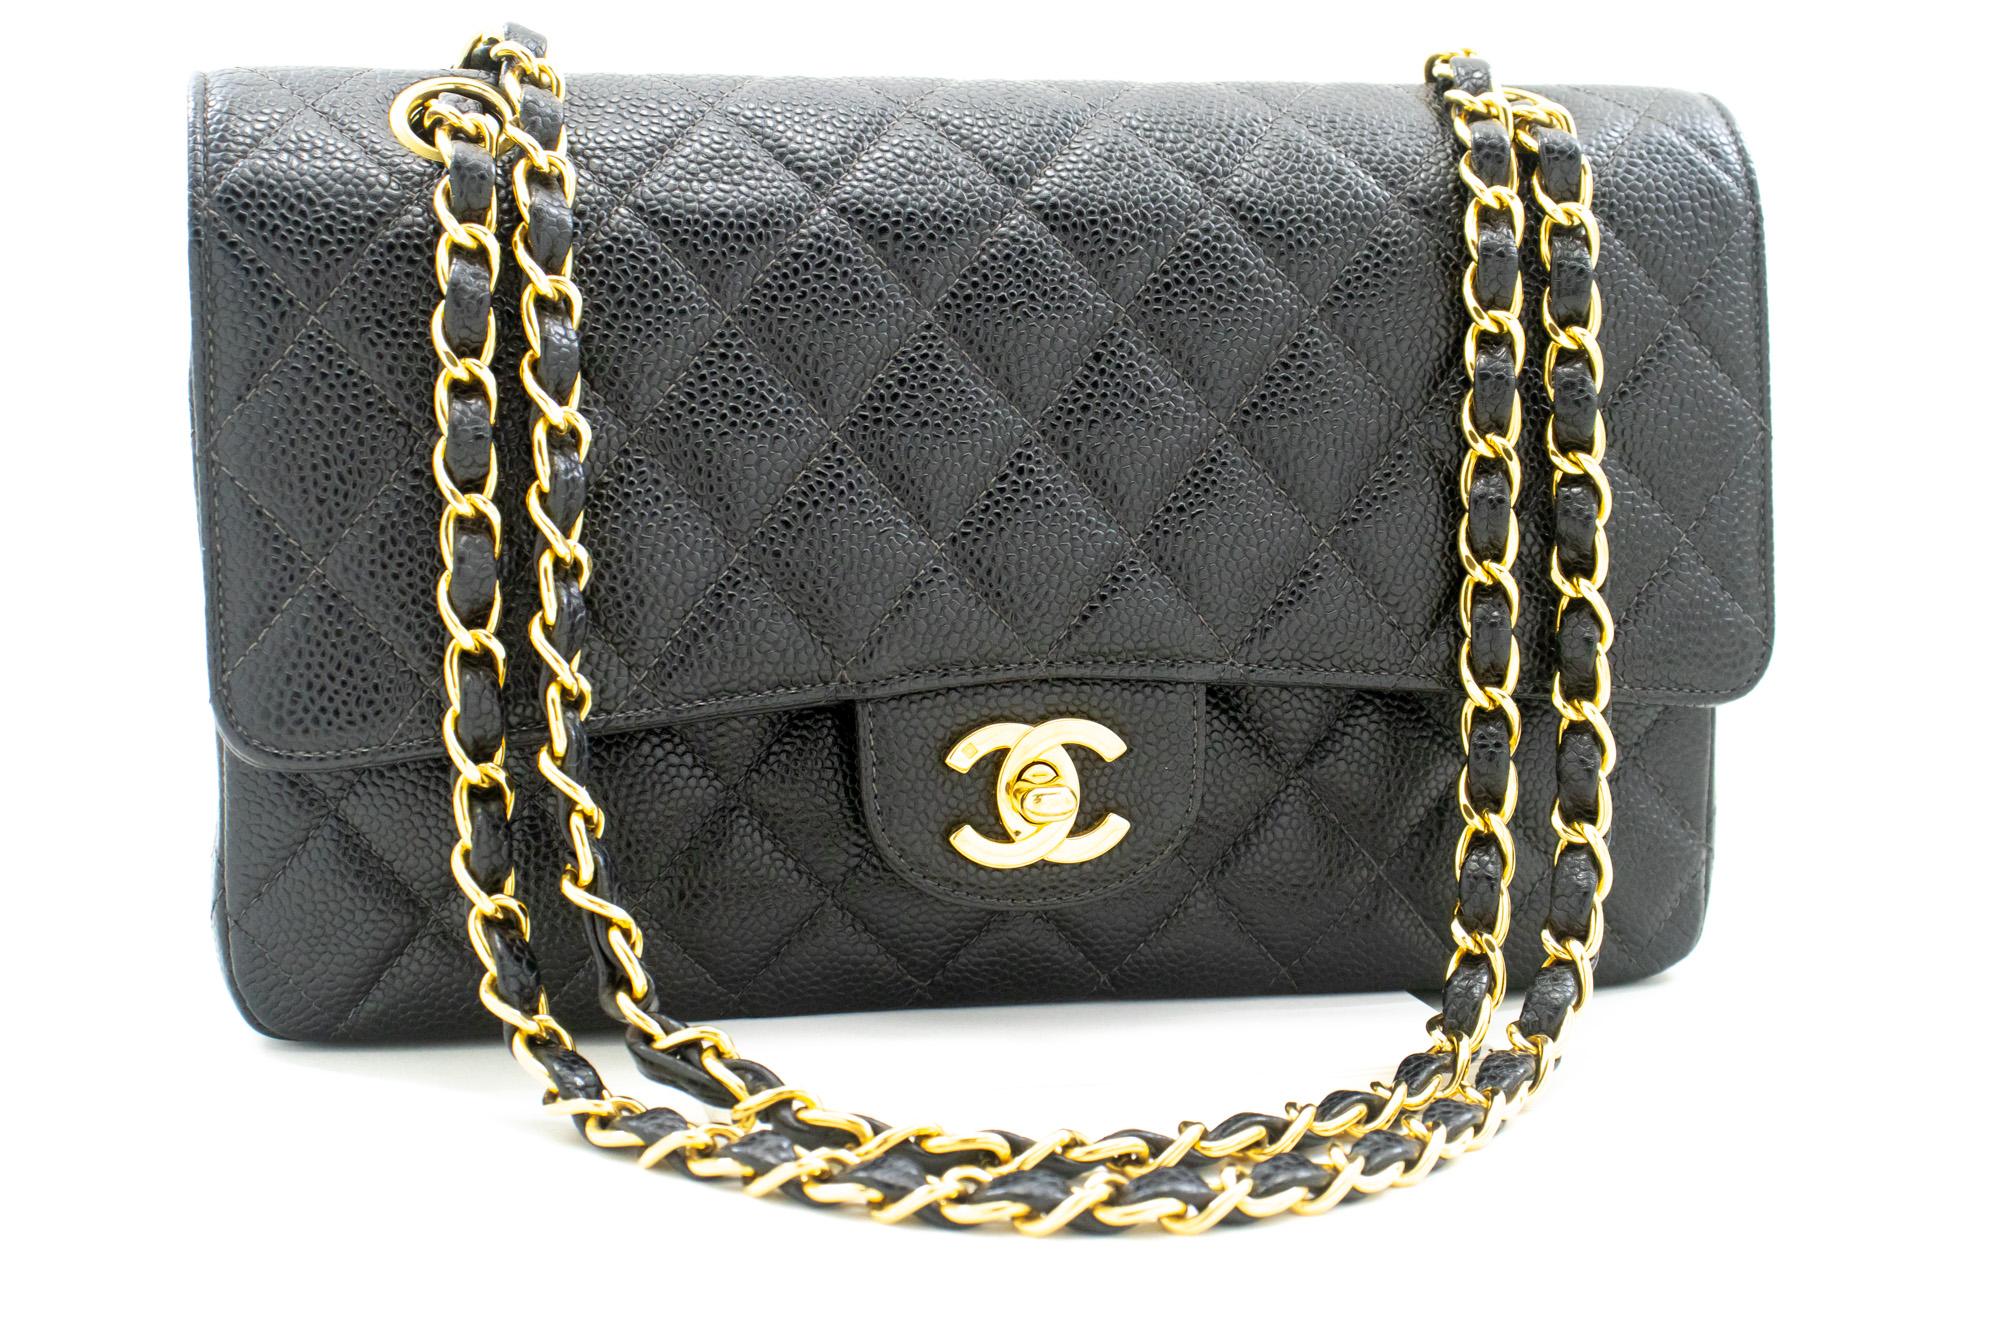 An authentic CHANEL Classic Double Flap Medium Chain Shoulder Bag Black Caviar. The color is Black. The outside material is Leather. The pattern is Solid. This item is Vintage / Classic. The year of manufacture would be 2000-2 0 0 2 .
Conditions &